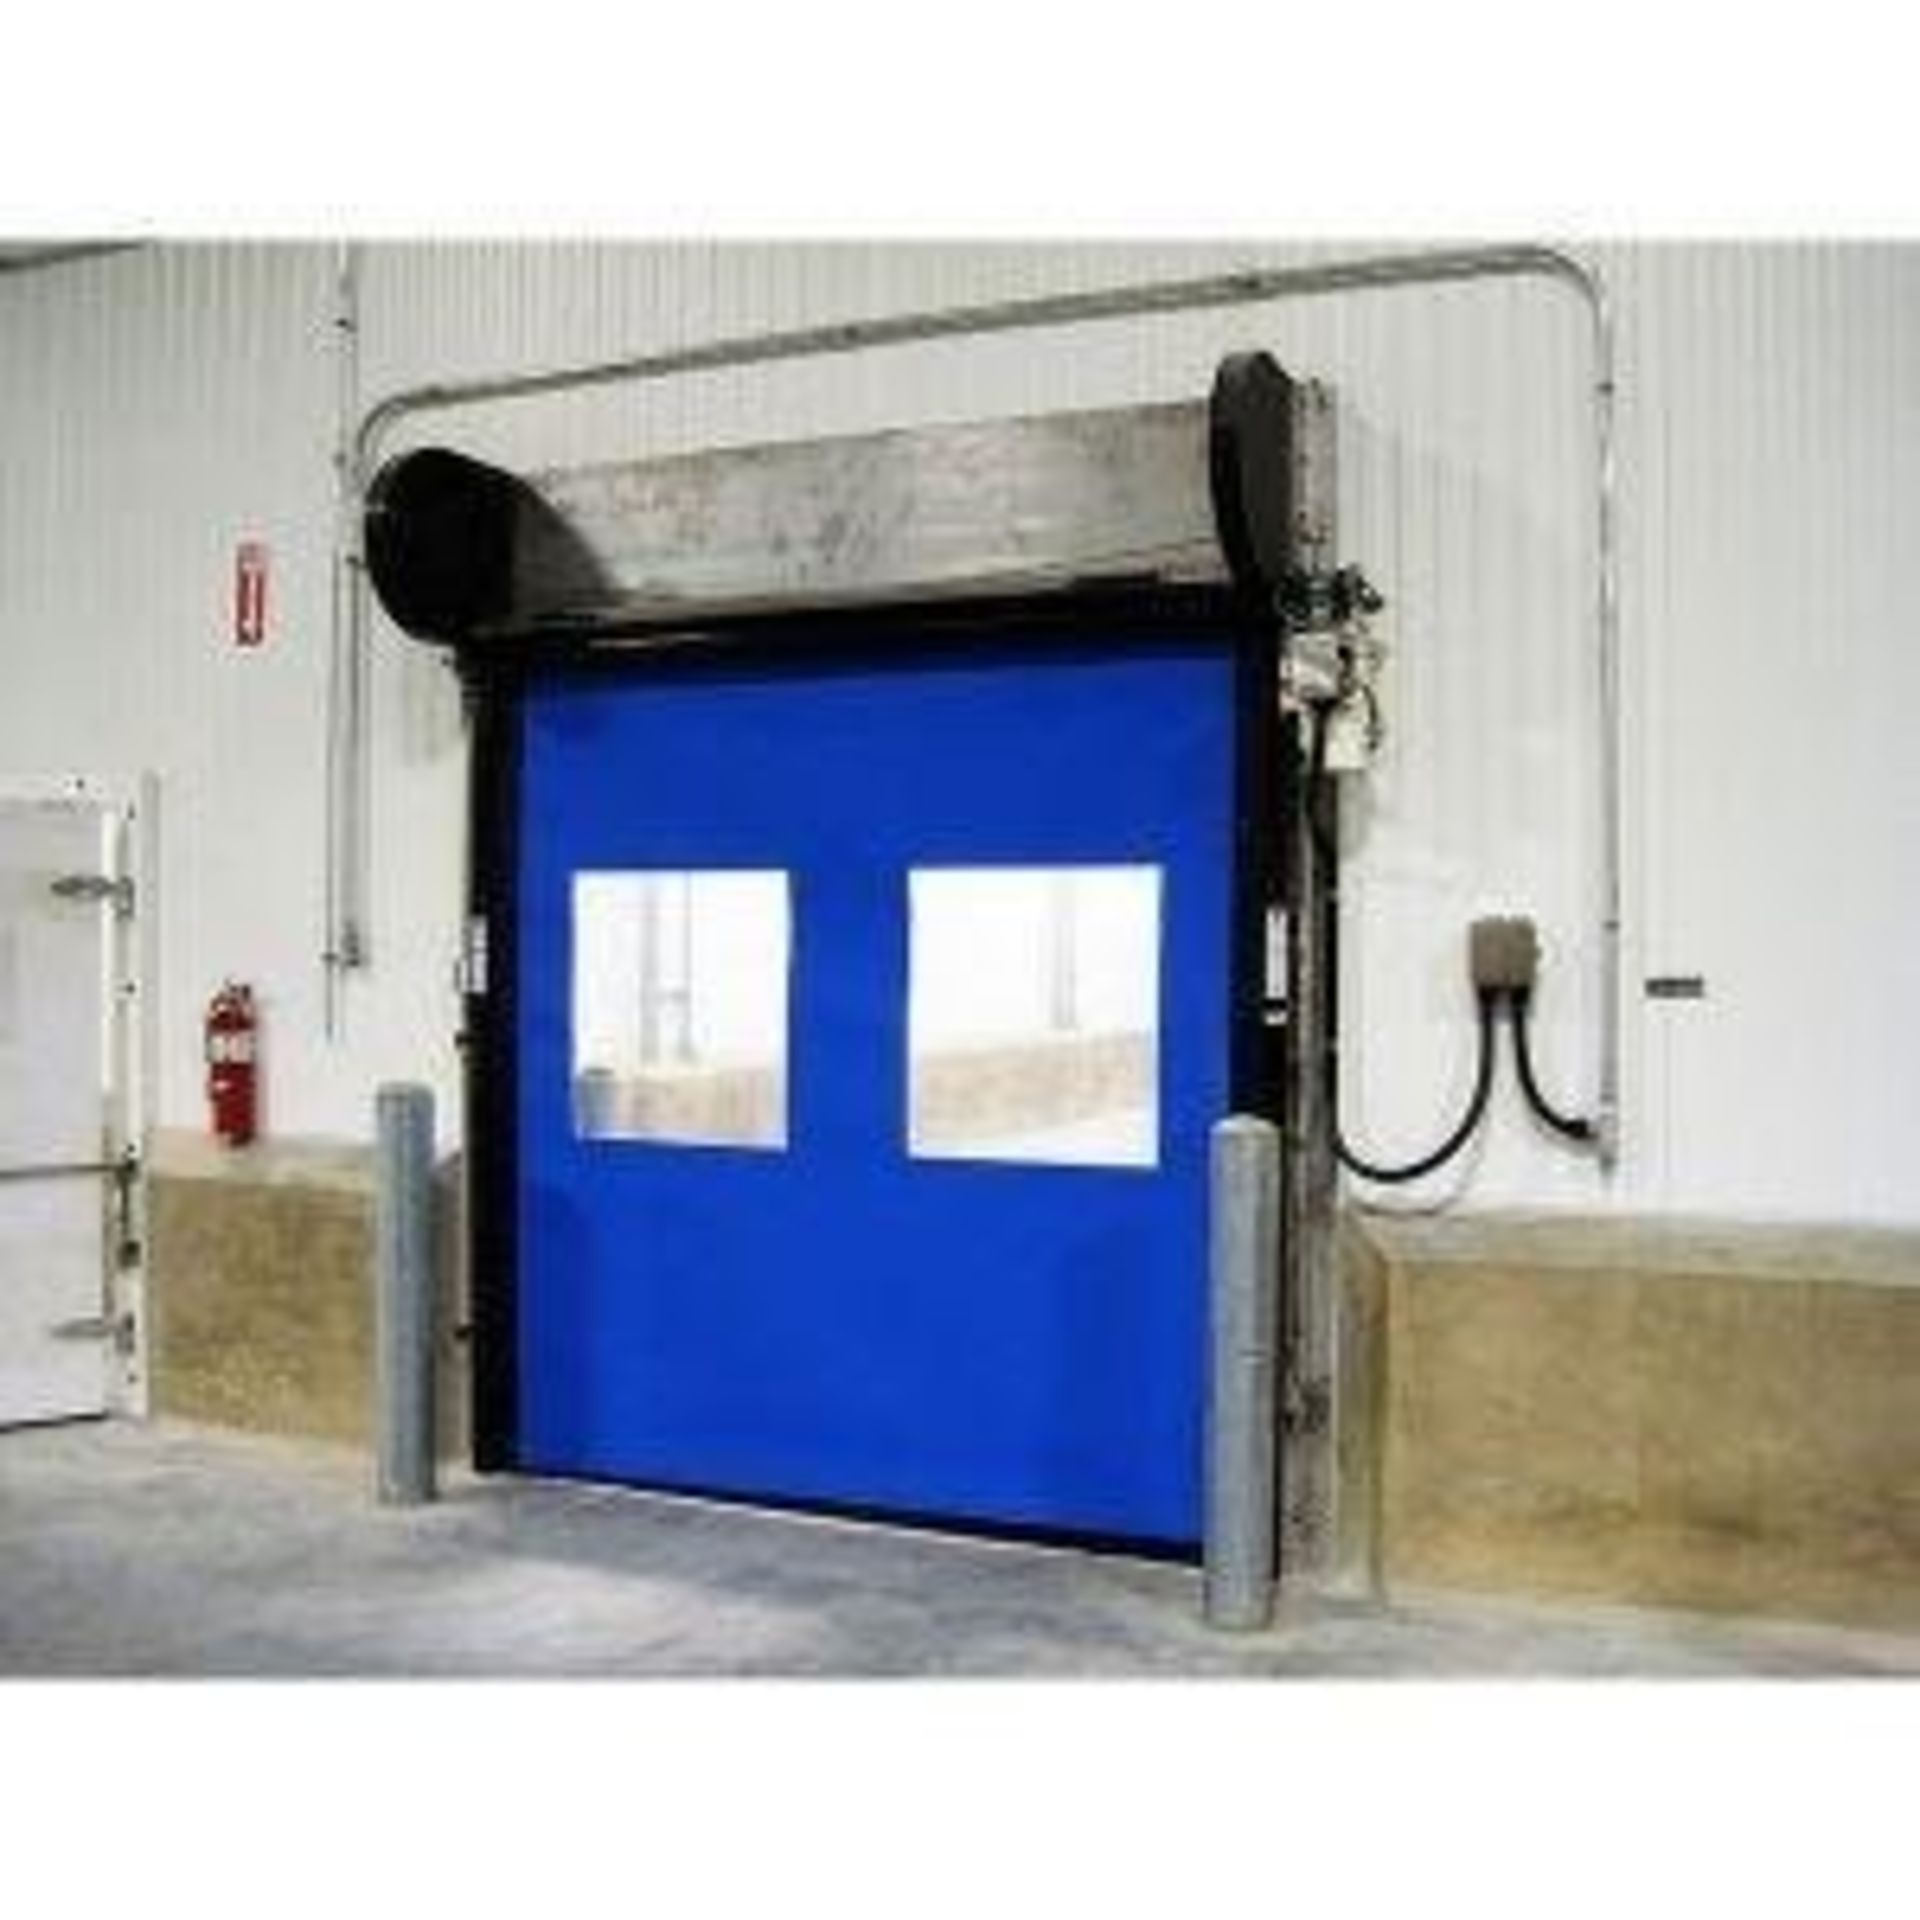 1 x Brand New in the box Fastrax Rite-Hite High Speed Door. C84. 6 feet large by 9 feet height. - Image 6 of 6